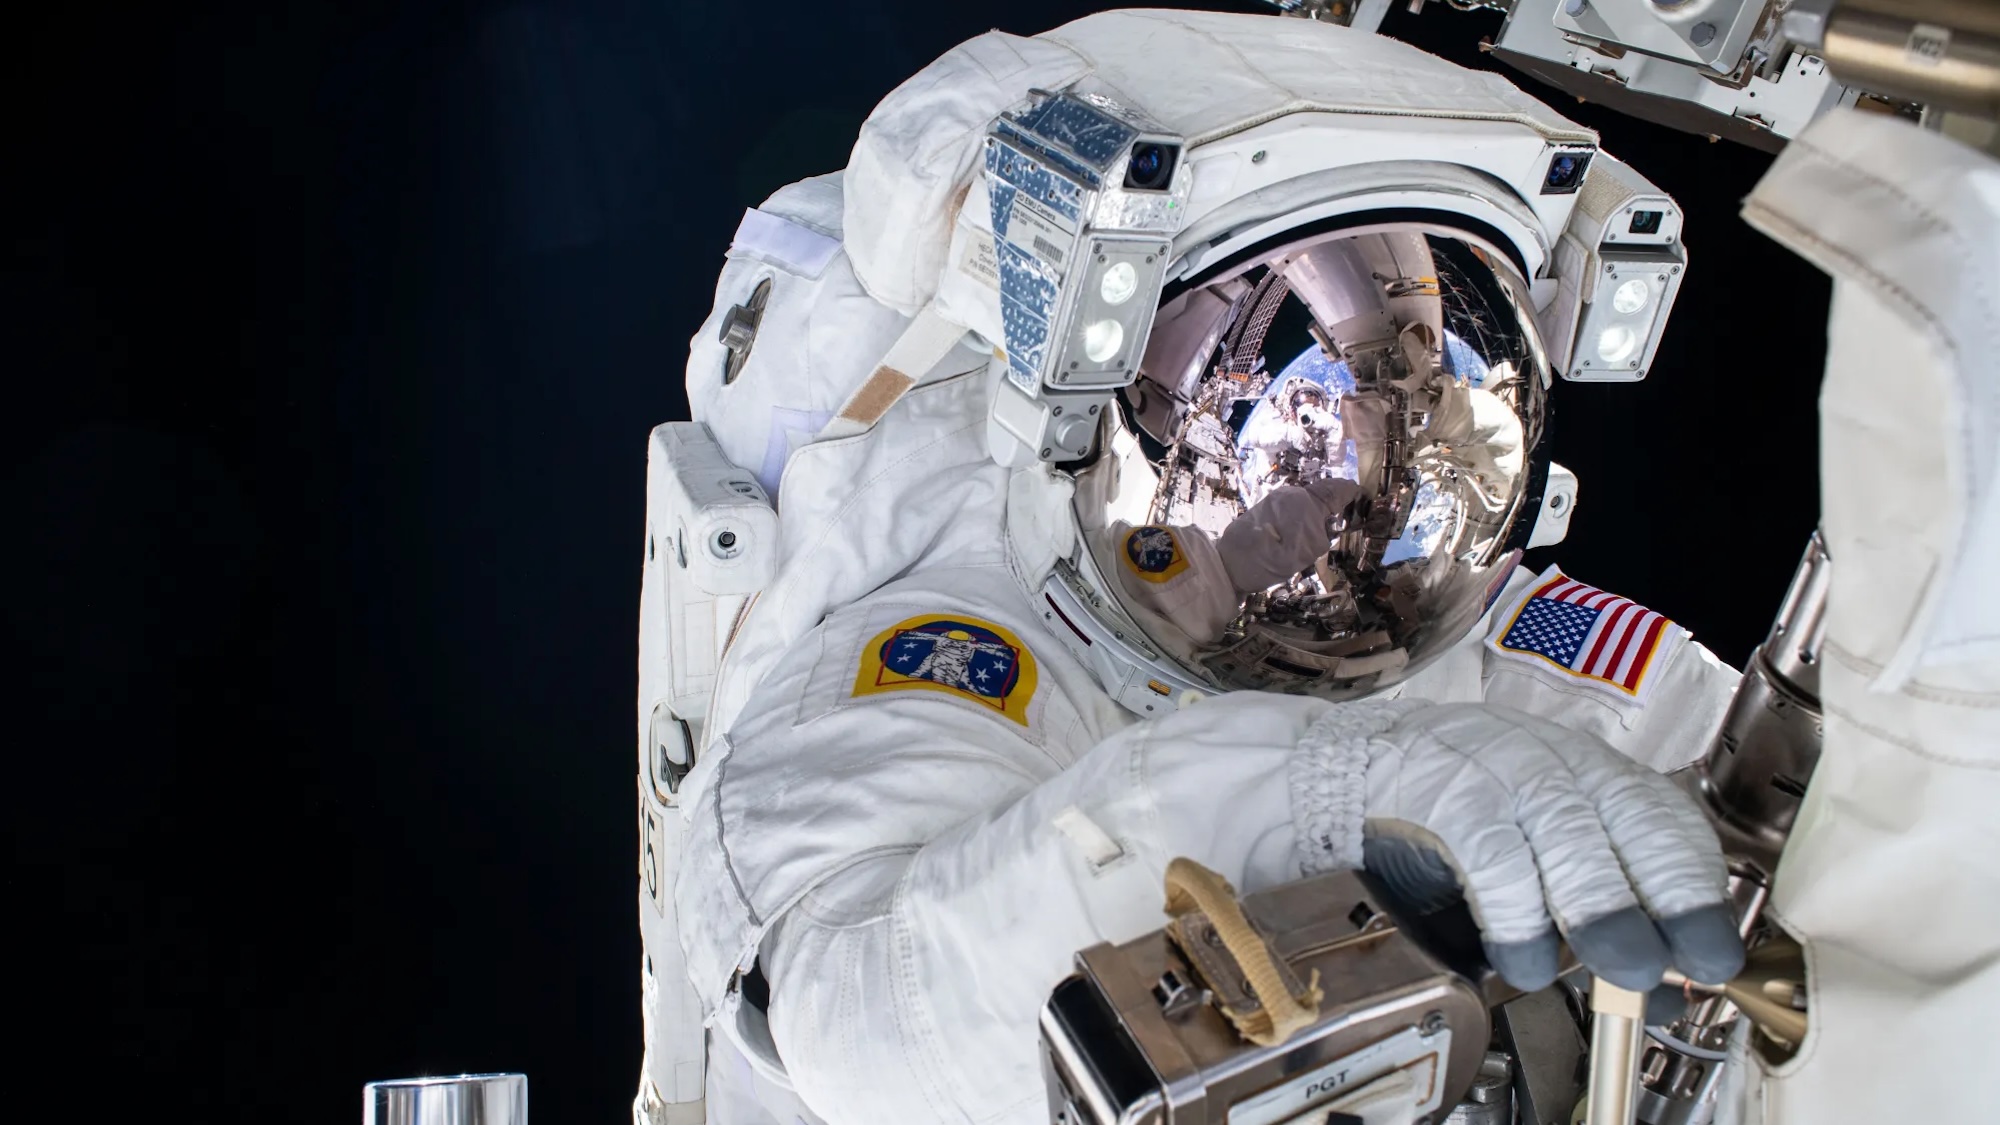 NASA astronauts will scrape microorganisms from the ISS during the upcoming spacewalk